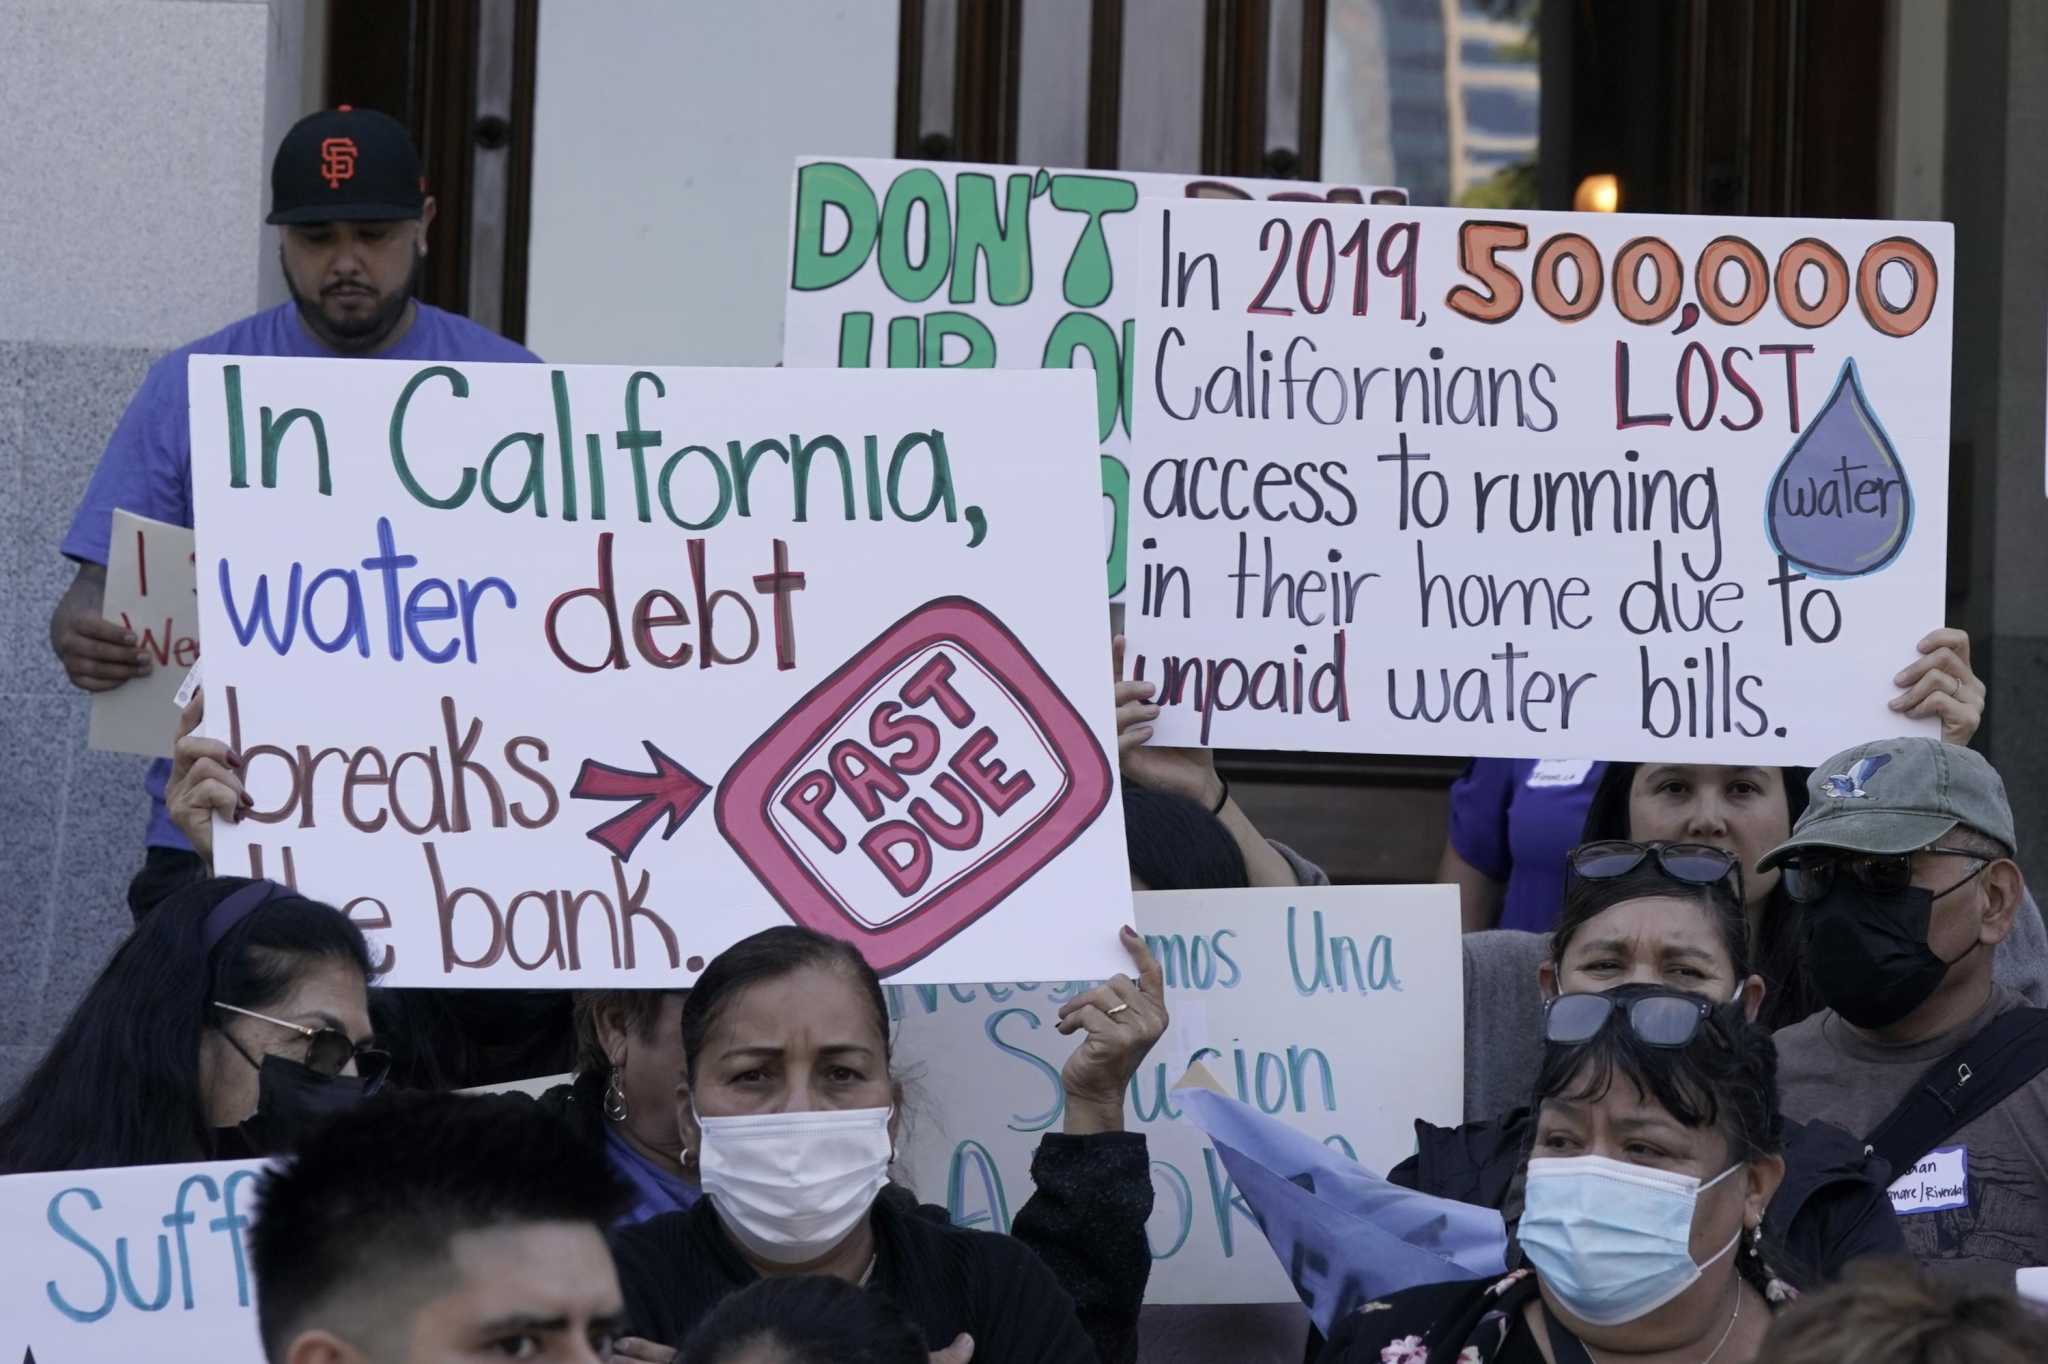 State board drags feet on providing clean drinking water to nearly 1 million Californians